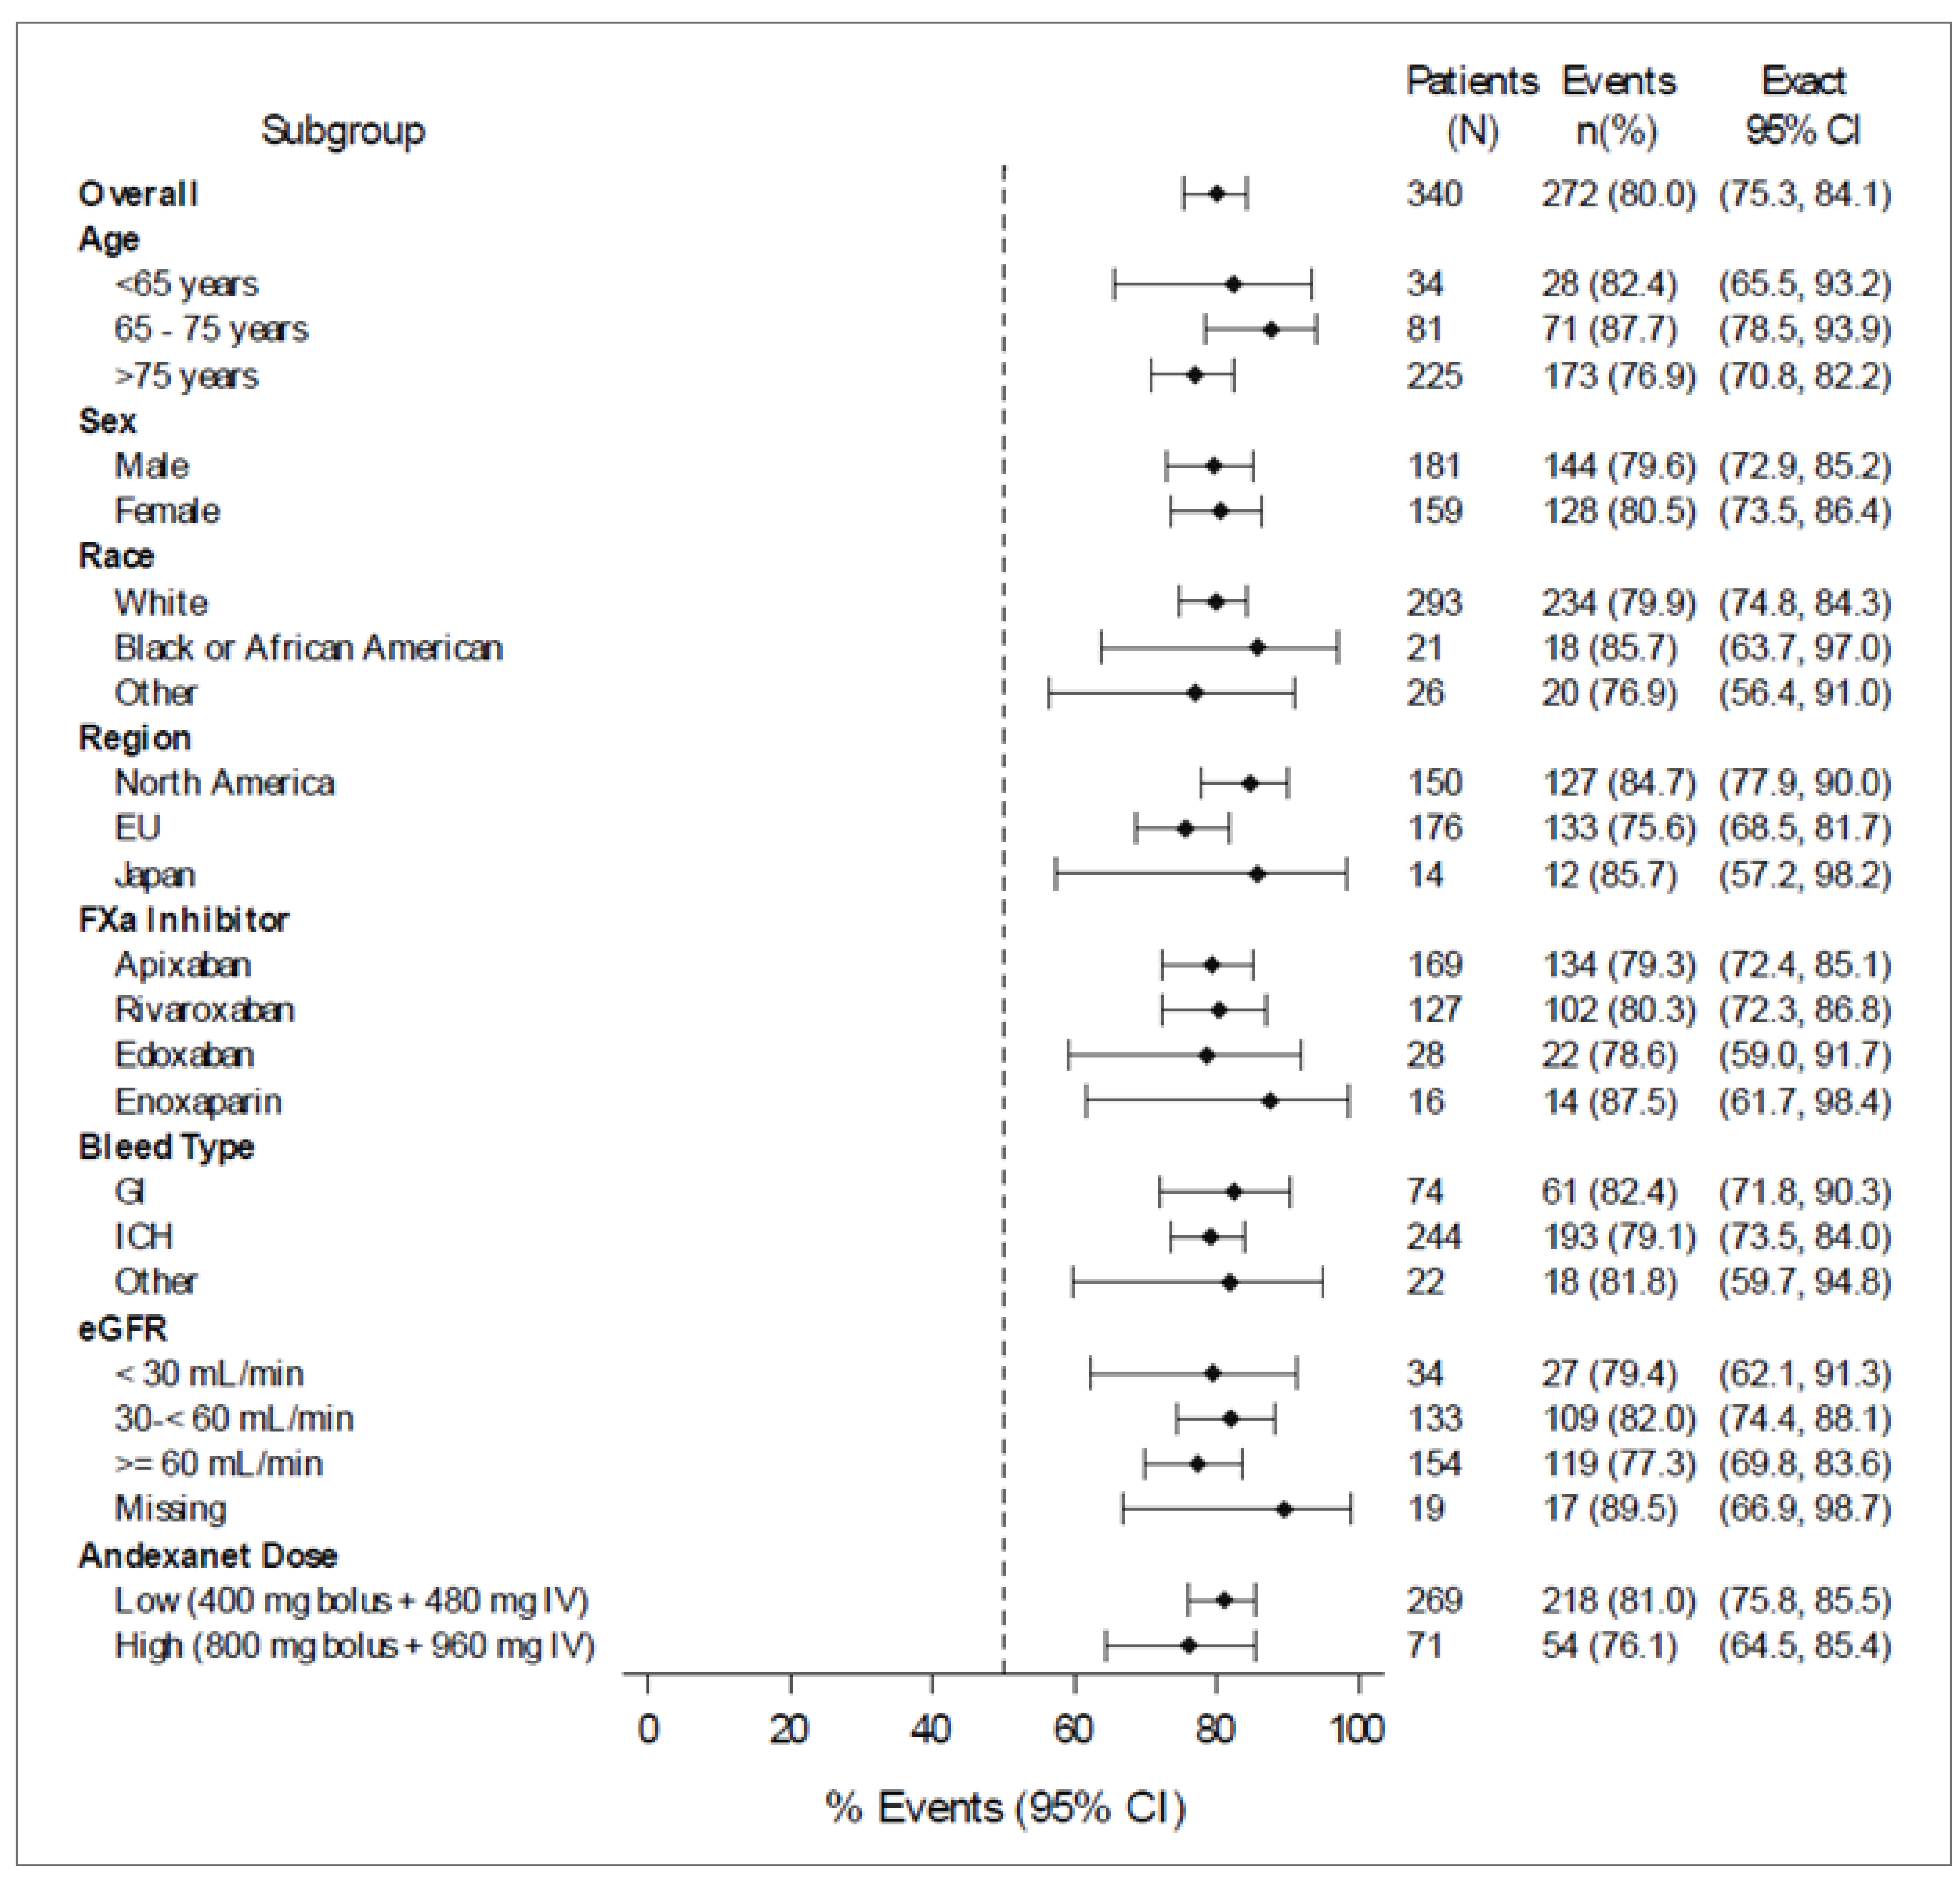 Results in hemostatic efficacy at 12 hours after andexanet infusion were consistent with the primary analysis across all subgroups (by age, sex, race, region, FXa inhibitor, bleed type, eGFR, and andexanet alfa dose).